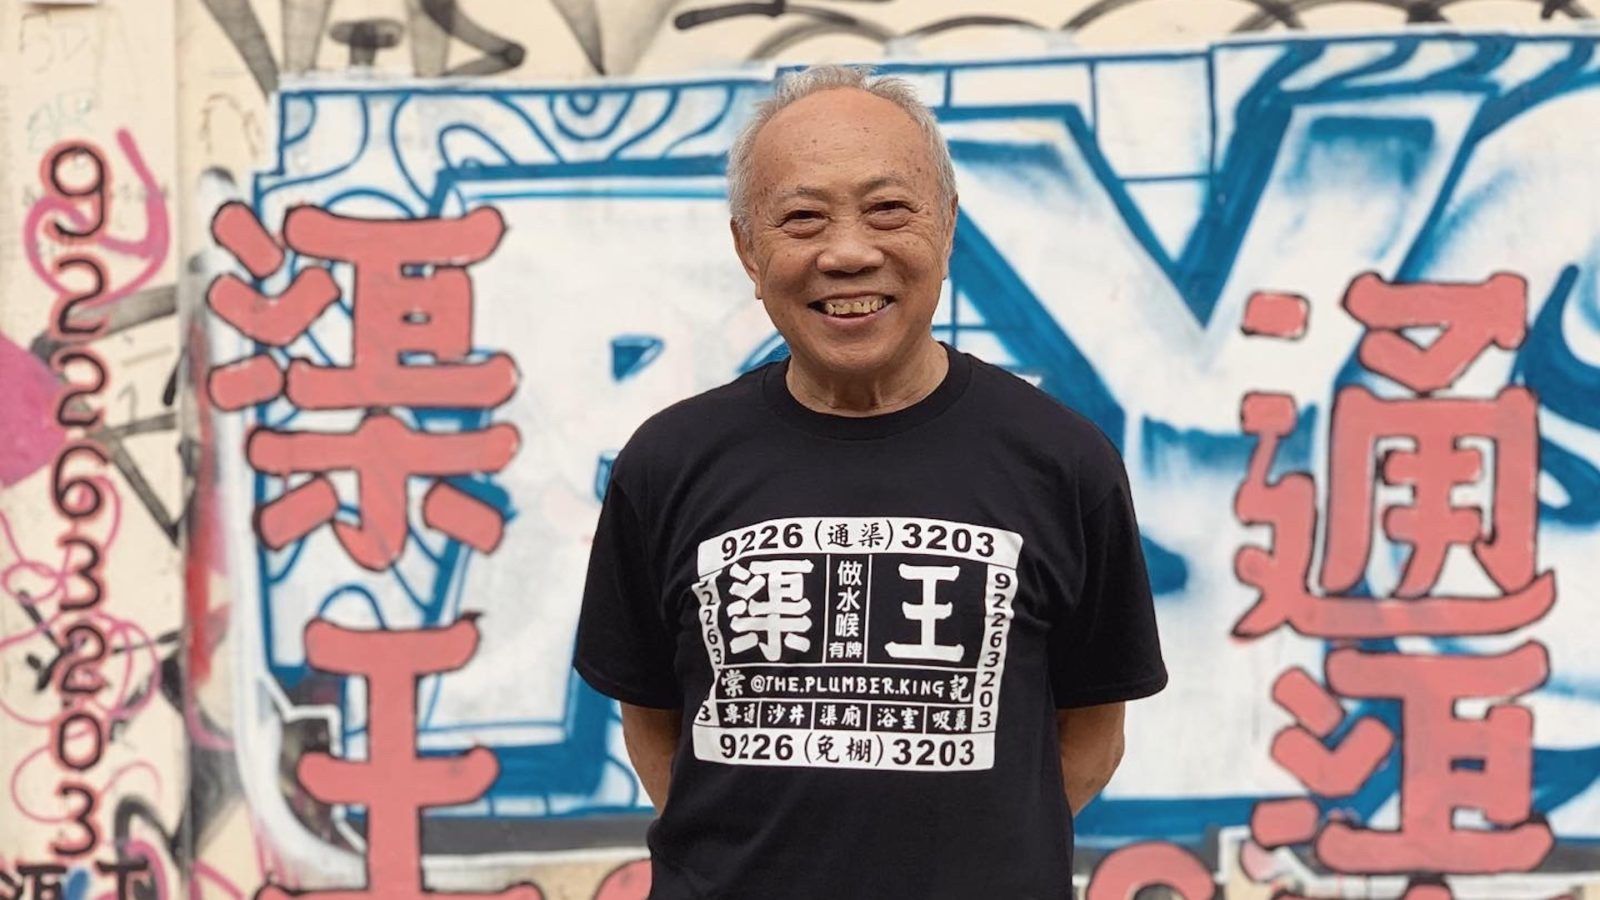 How The Plumber King became an accidental graffiti icon in Hong Kong